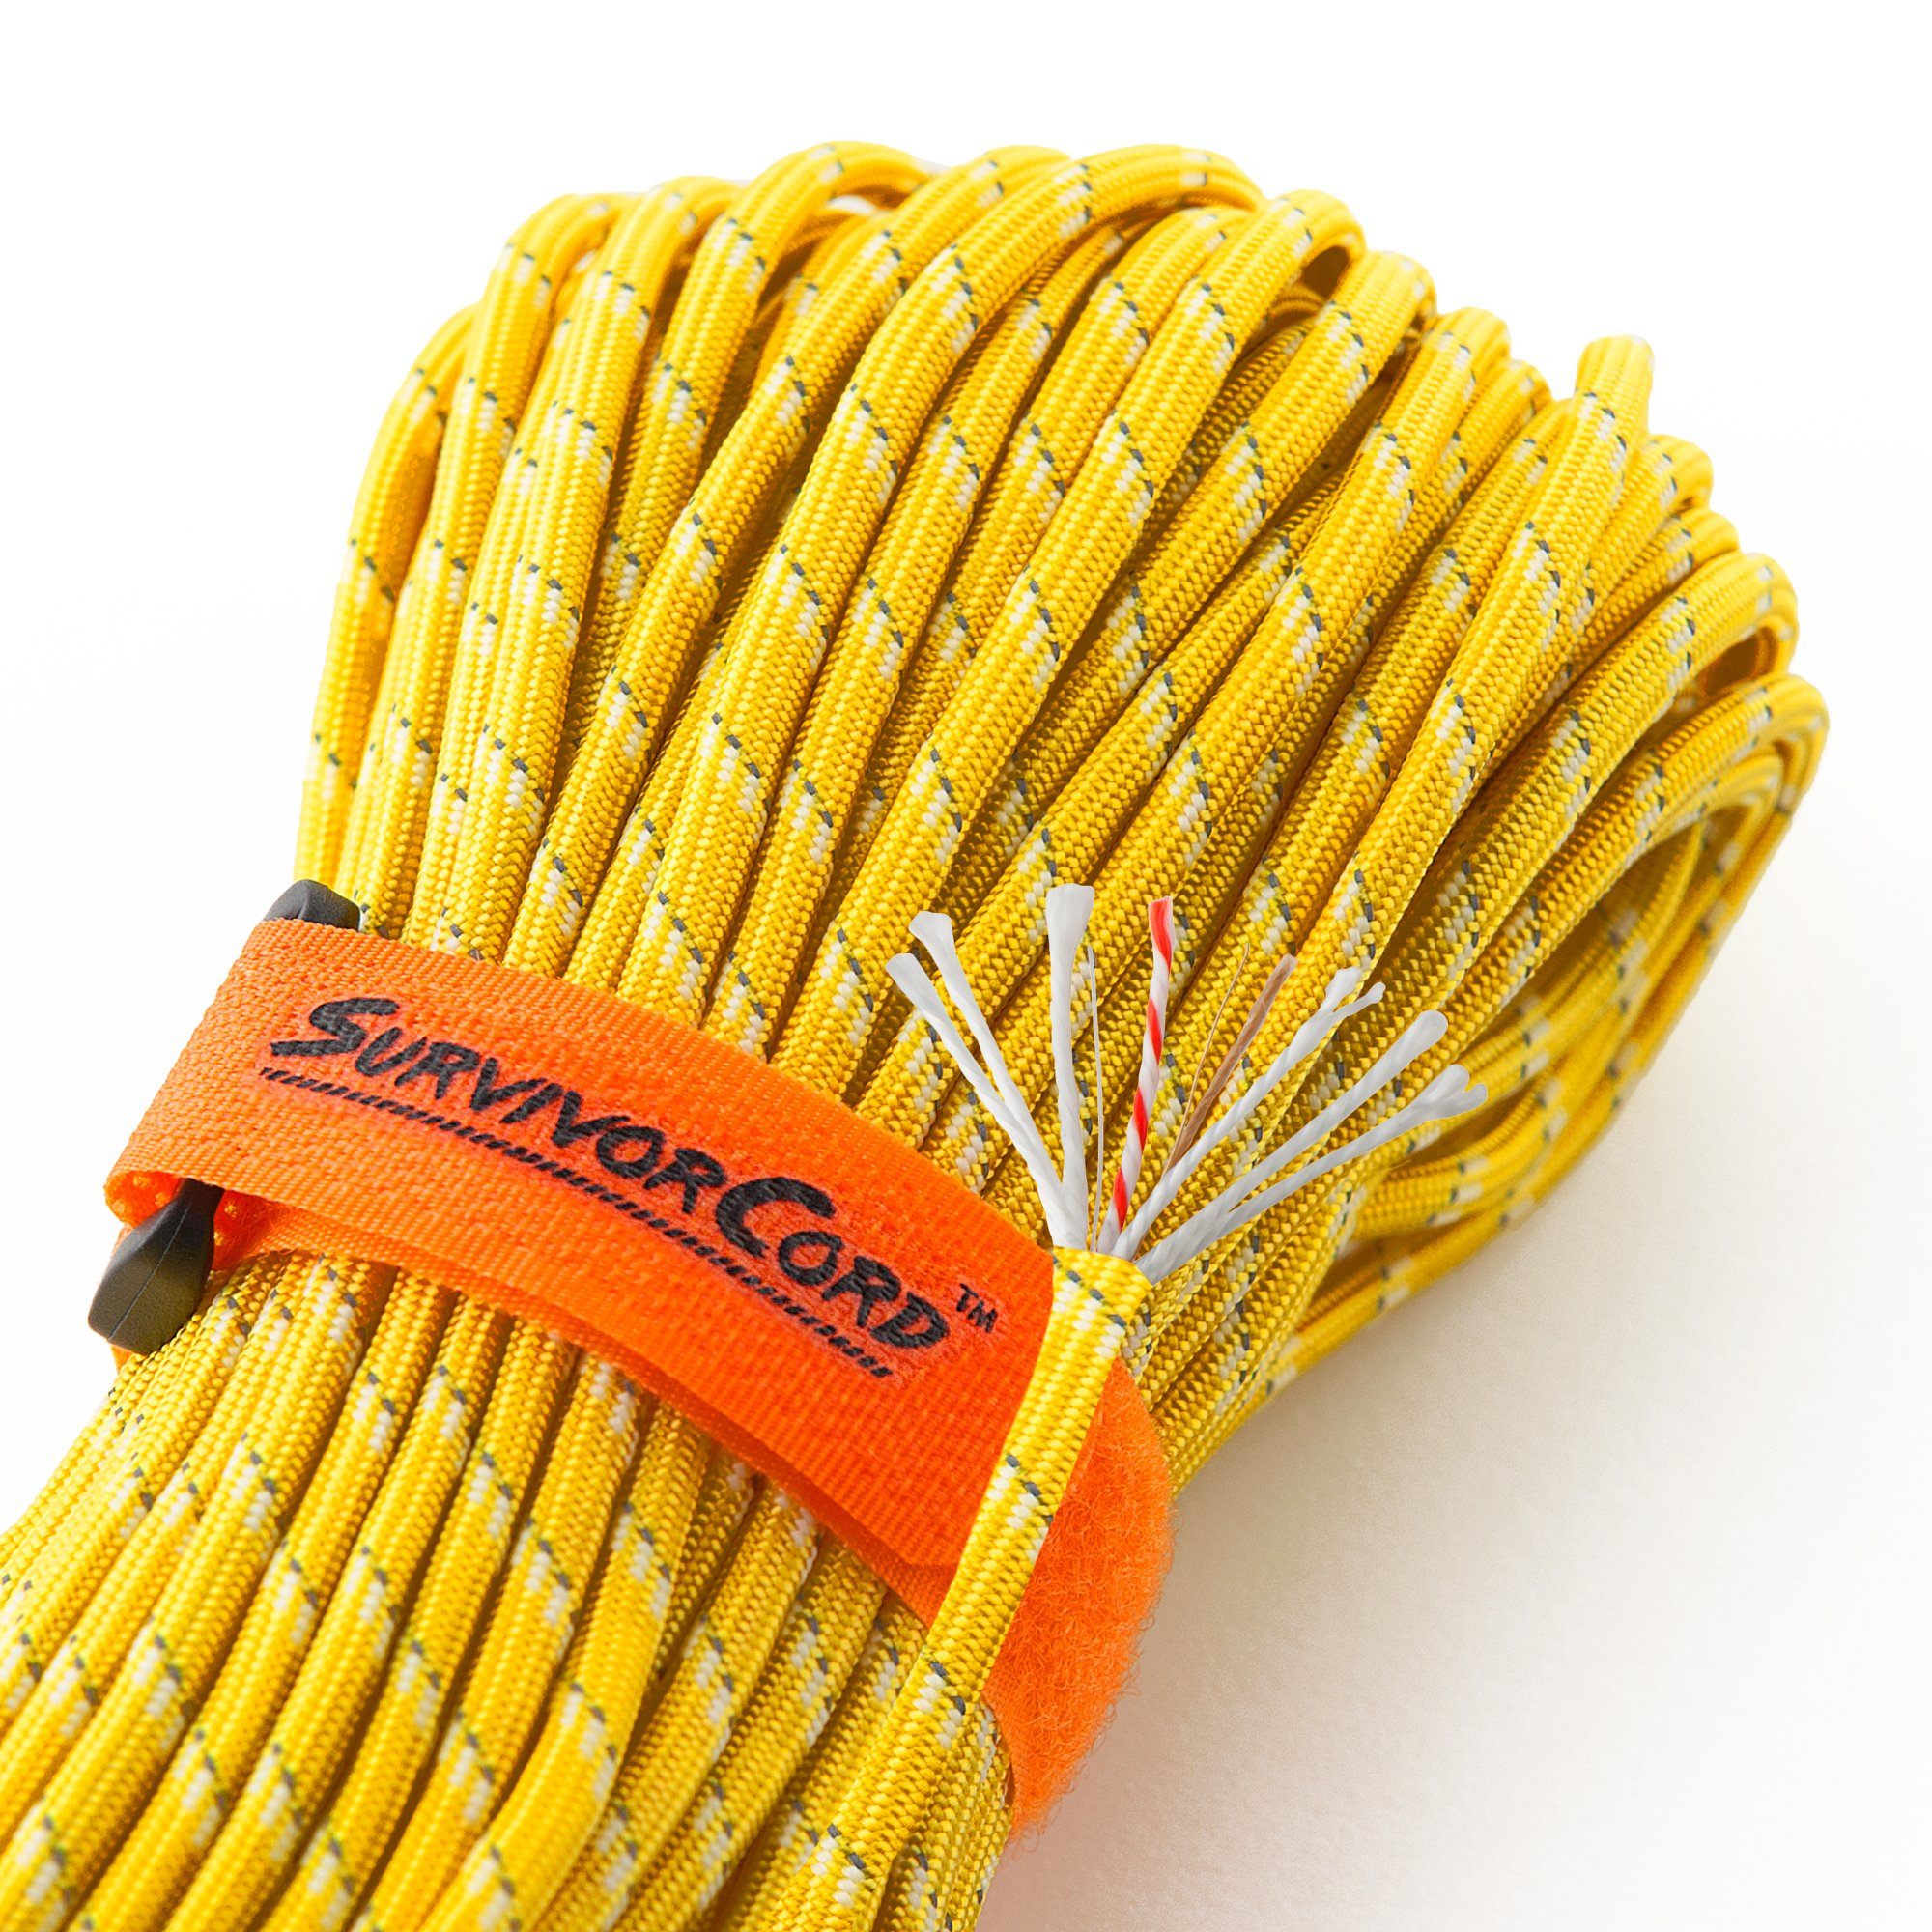 95 Cord - Neon Yellow - Type 1 Cord - 100 Feet on Plastic Winder - Bored  Paracord Brand 